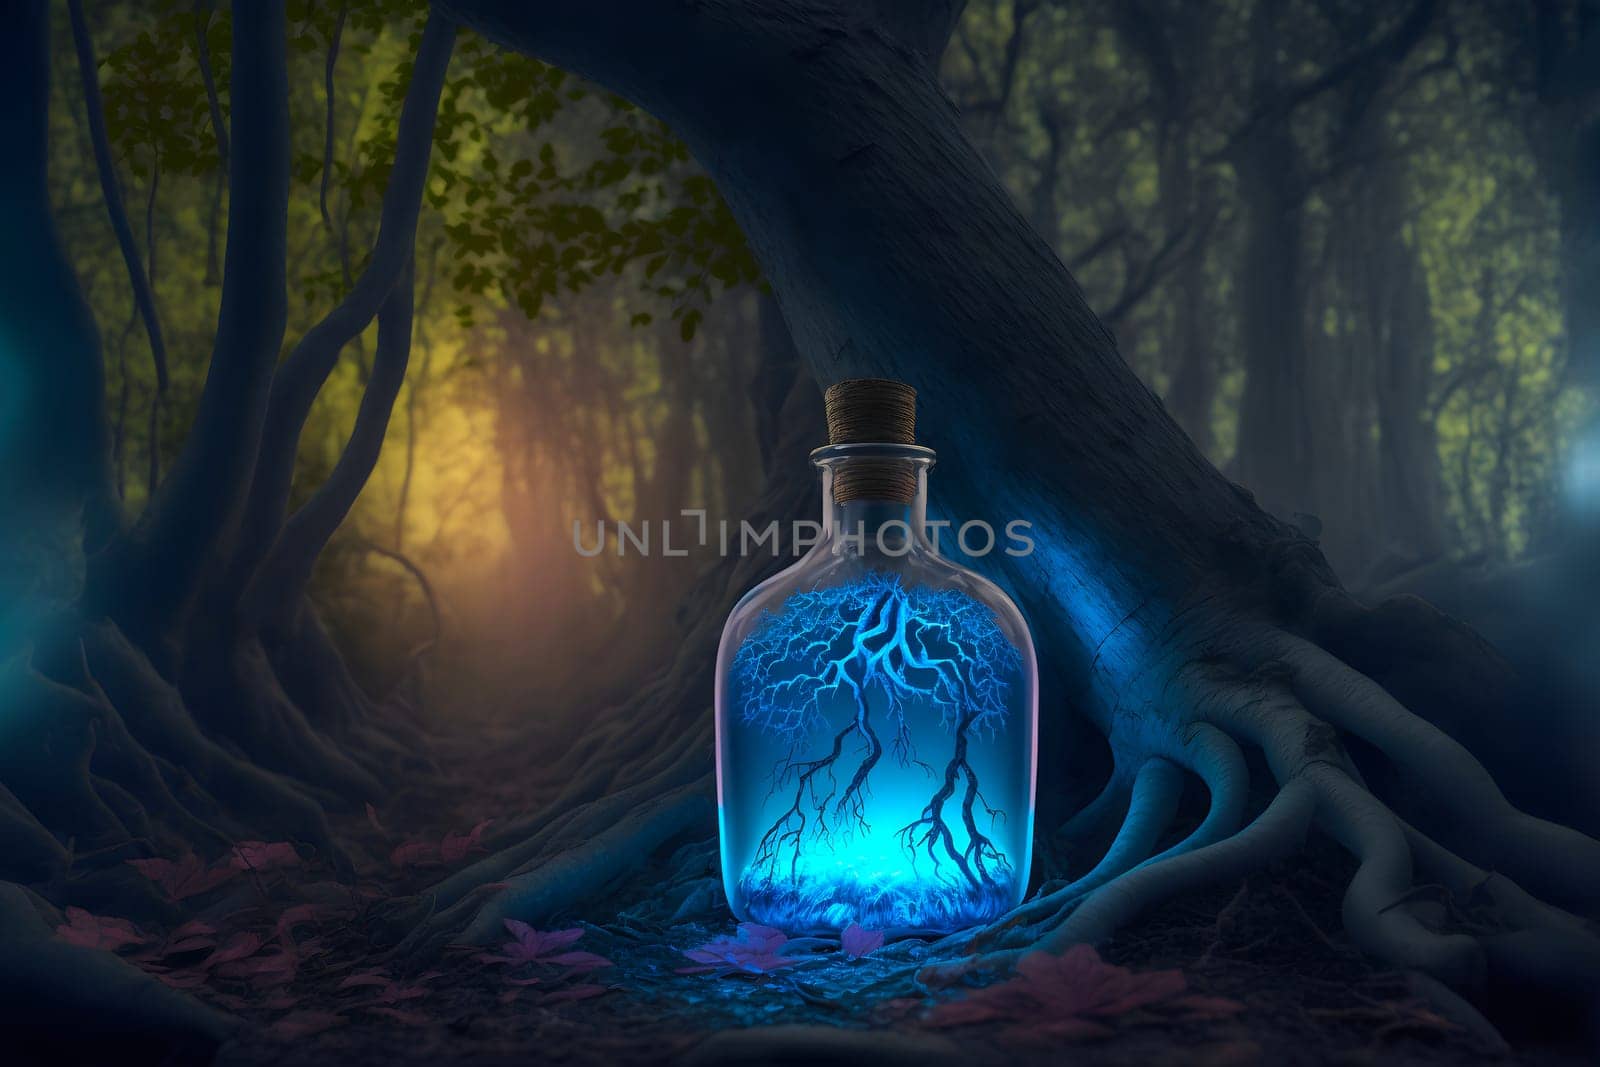 glowing potion bottle on night forest ground, neural network generated art by z1b